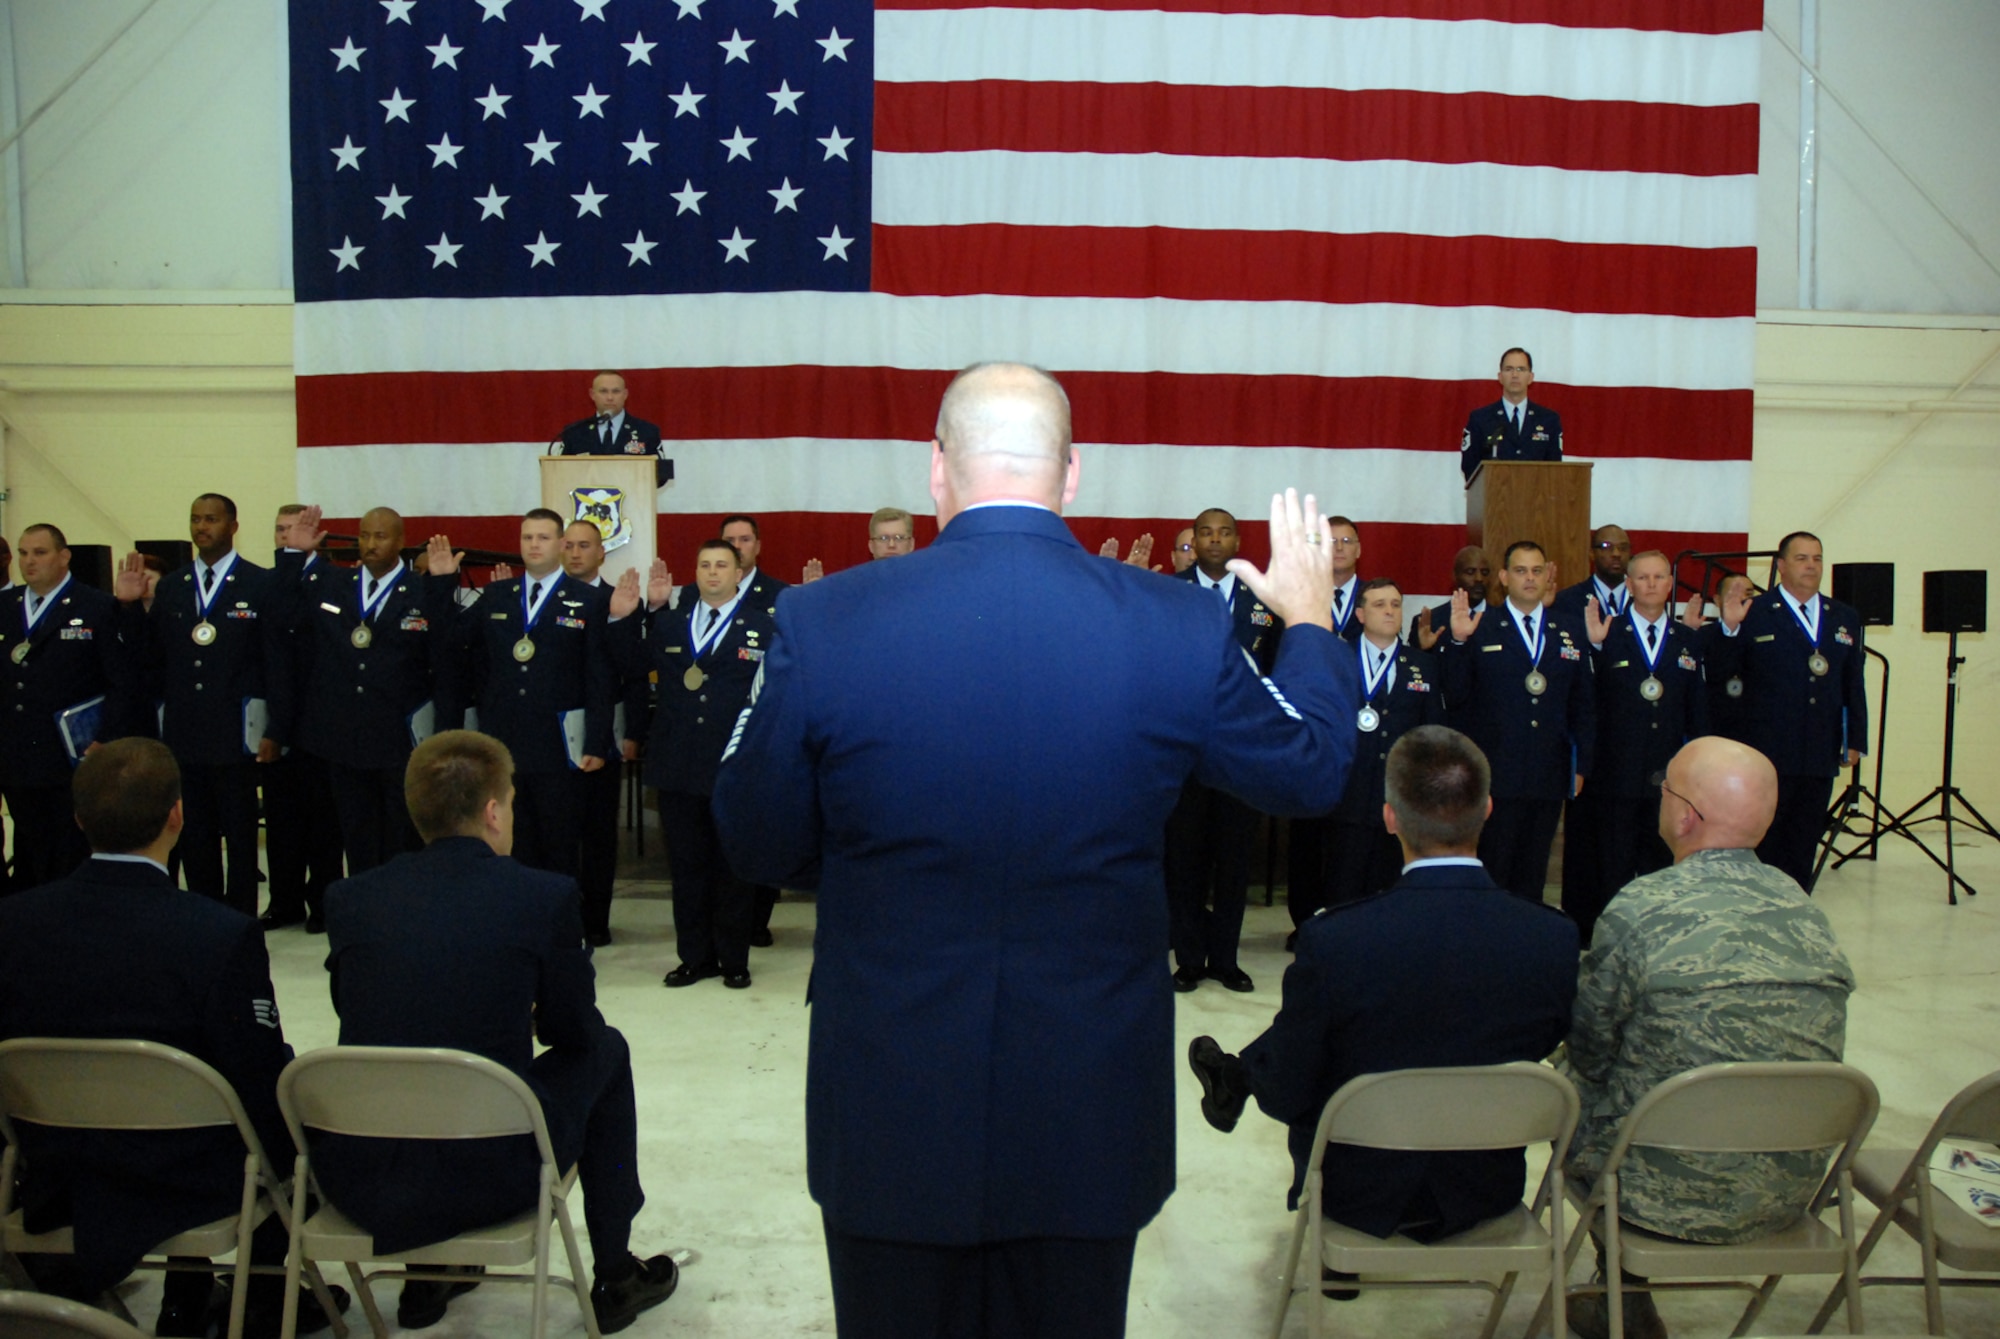 Chief Master Sgt. John Anderson, 94th Airlift Wing command chief, inducts 30 newly promoted master sergeants at the Senior NCO Induction Ceremony Oct. 3 in Hangar 5. Col. Heath Nuckolls, 94th AW commander, presented each SNCO with a Certificate of Induction during the ceremony, which was sponsored by the Dobbins Top III group.

"When an Air Force NCO is promoted to master sergeant, they take on more responsibility as more is expected of them," said Chief Anderson. "This ceremony was a formal way to recognize their new promotion and to reemphasize their responsibility to lead, guide and mentor Airmen.